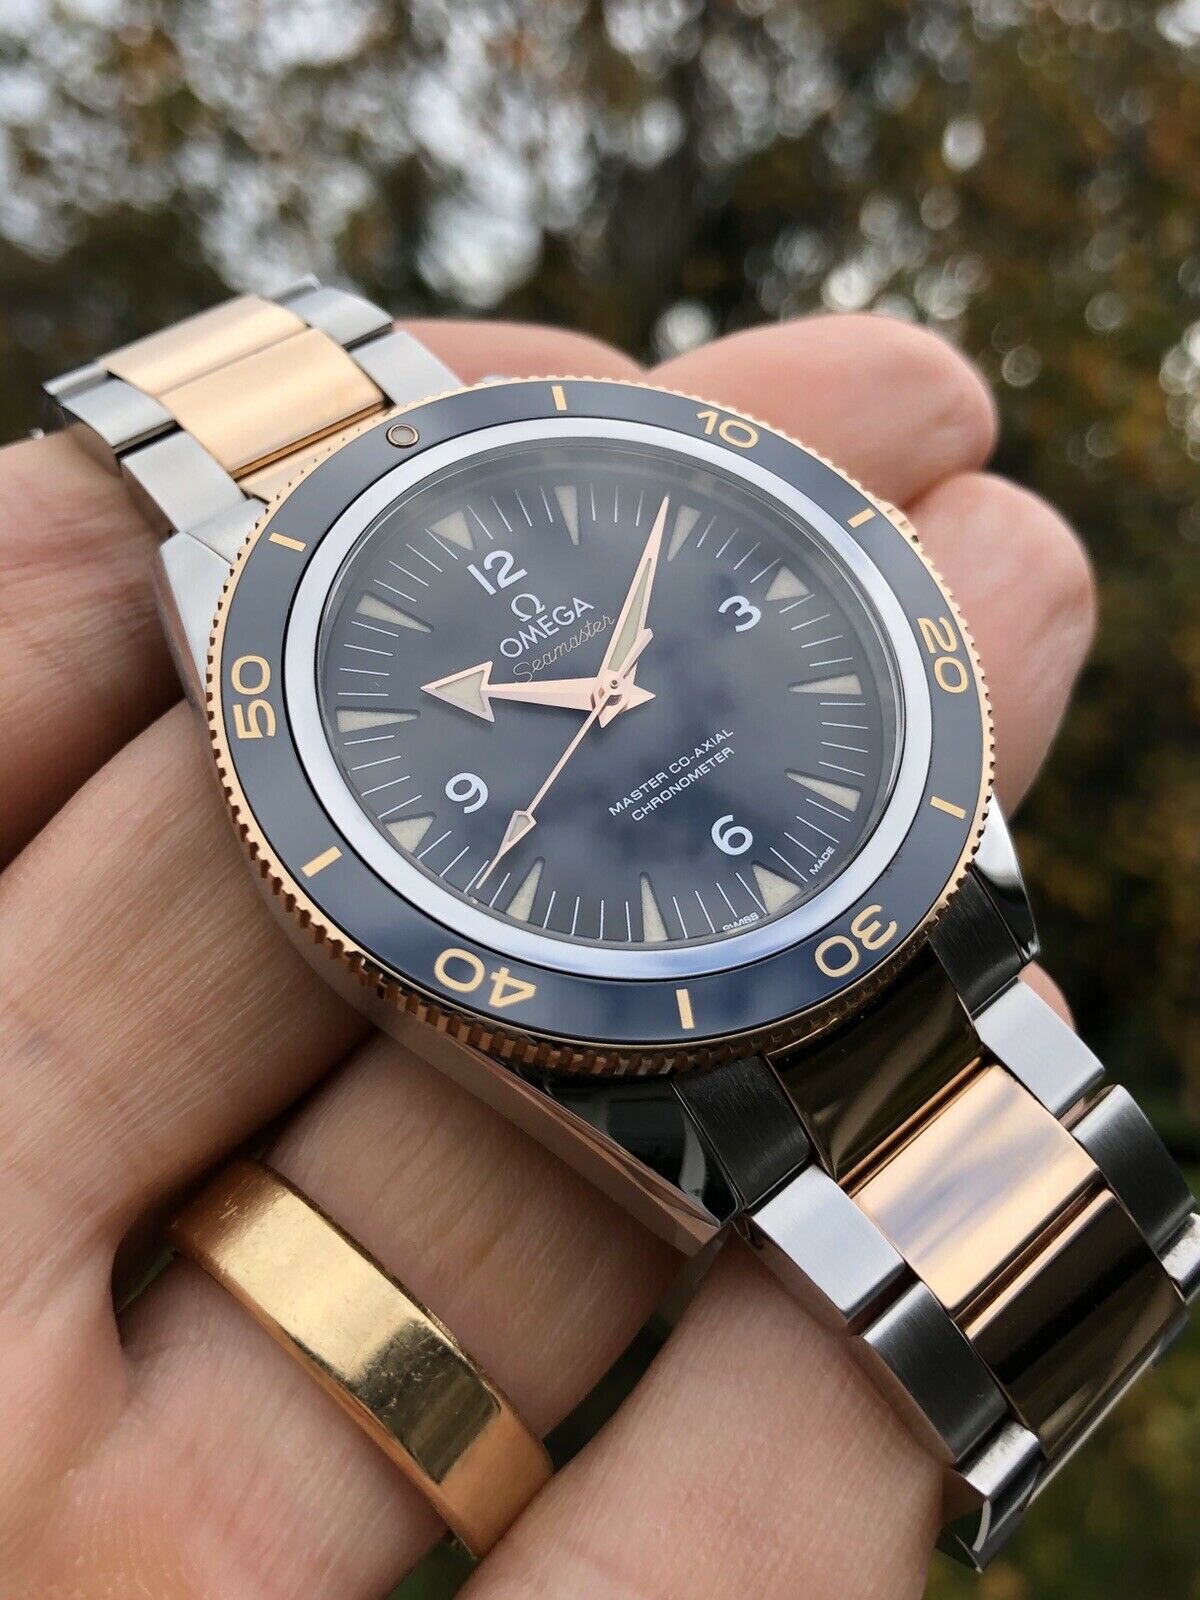 Omega_Seamaster_300_Co_E2_80_91Axial_41mm_Sedna_Gold_Two-Tone_233.20.41.21.01.001_-_2016_Watch_Vault_02.jpg